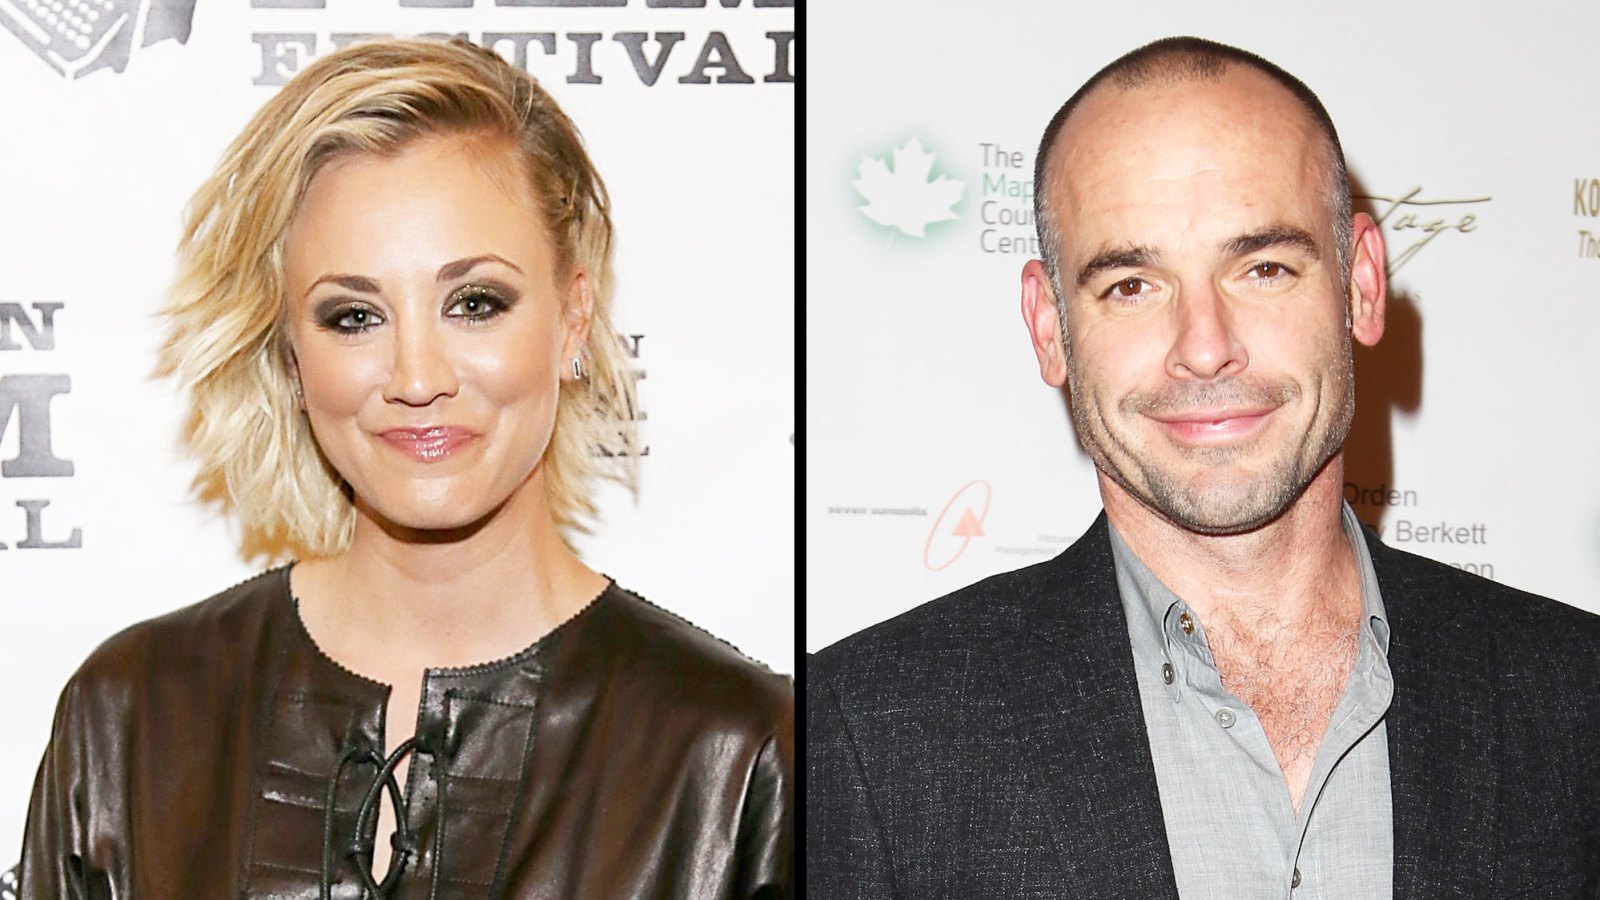 Kaley Cuoco and Paul Blackthorne